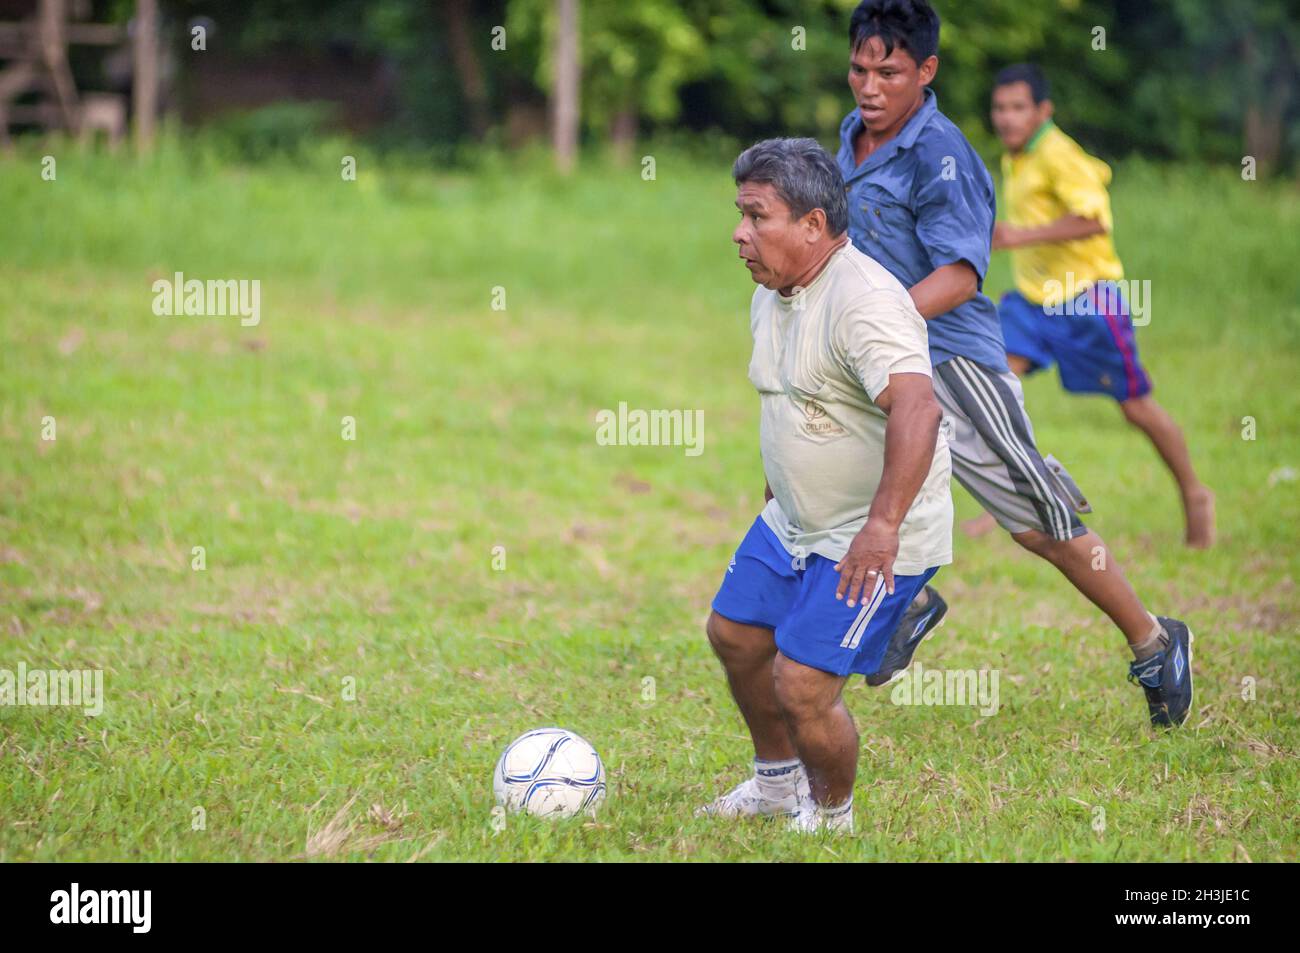 Peru Soccer Player High Resolution Stock Photography and Images - Alamy